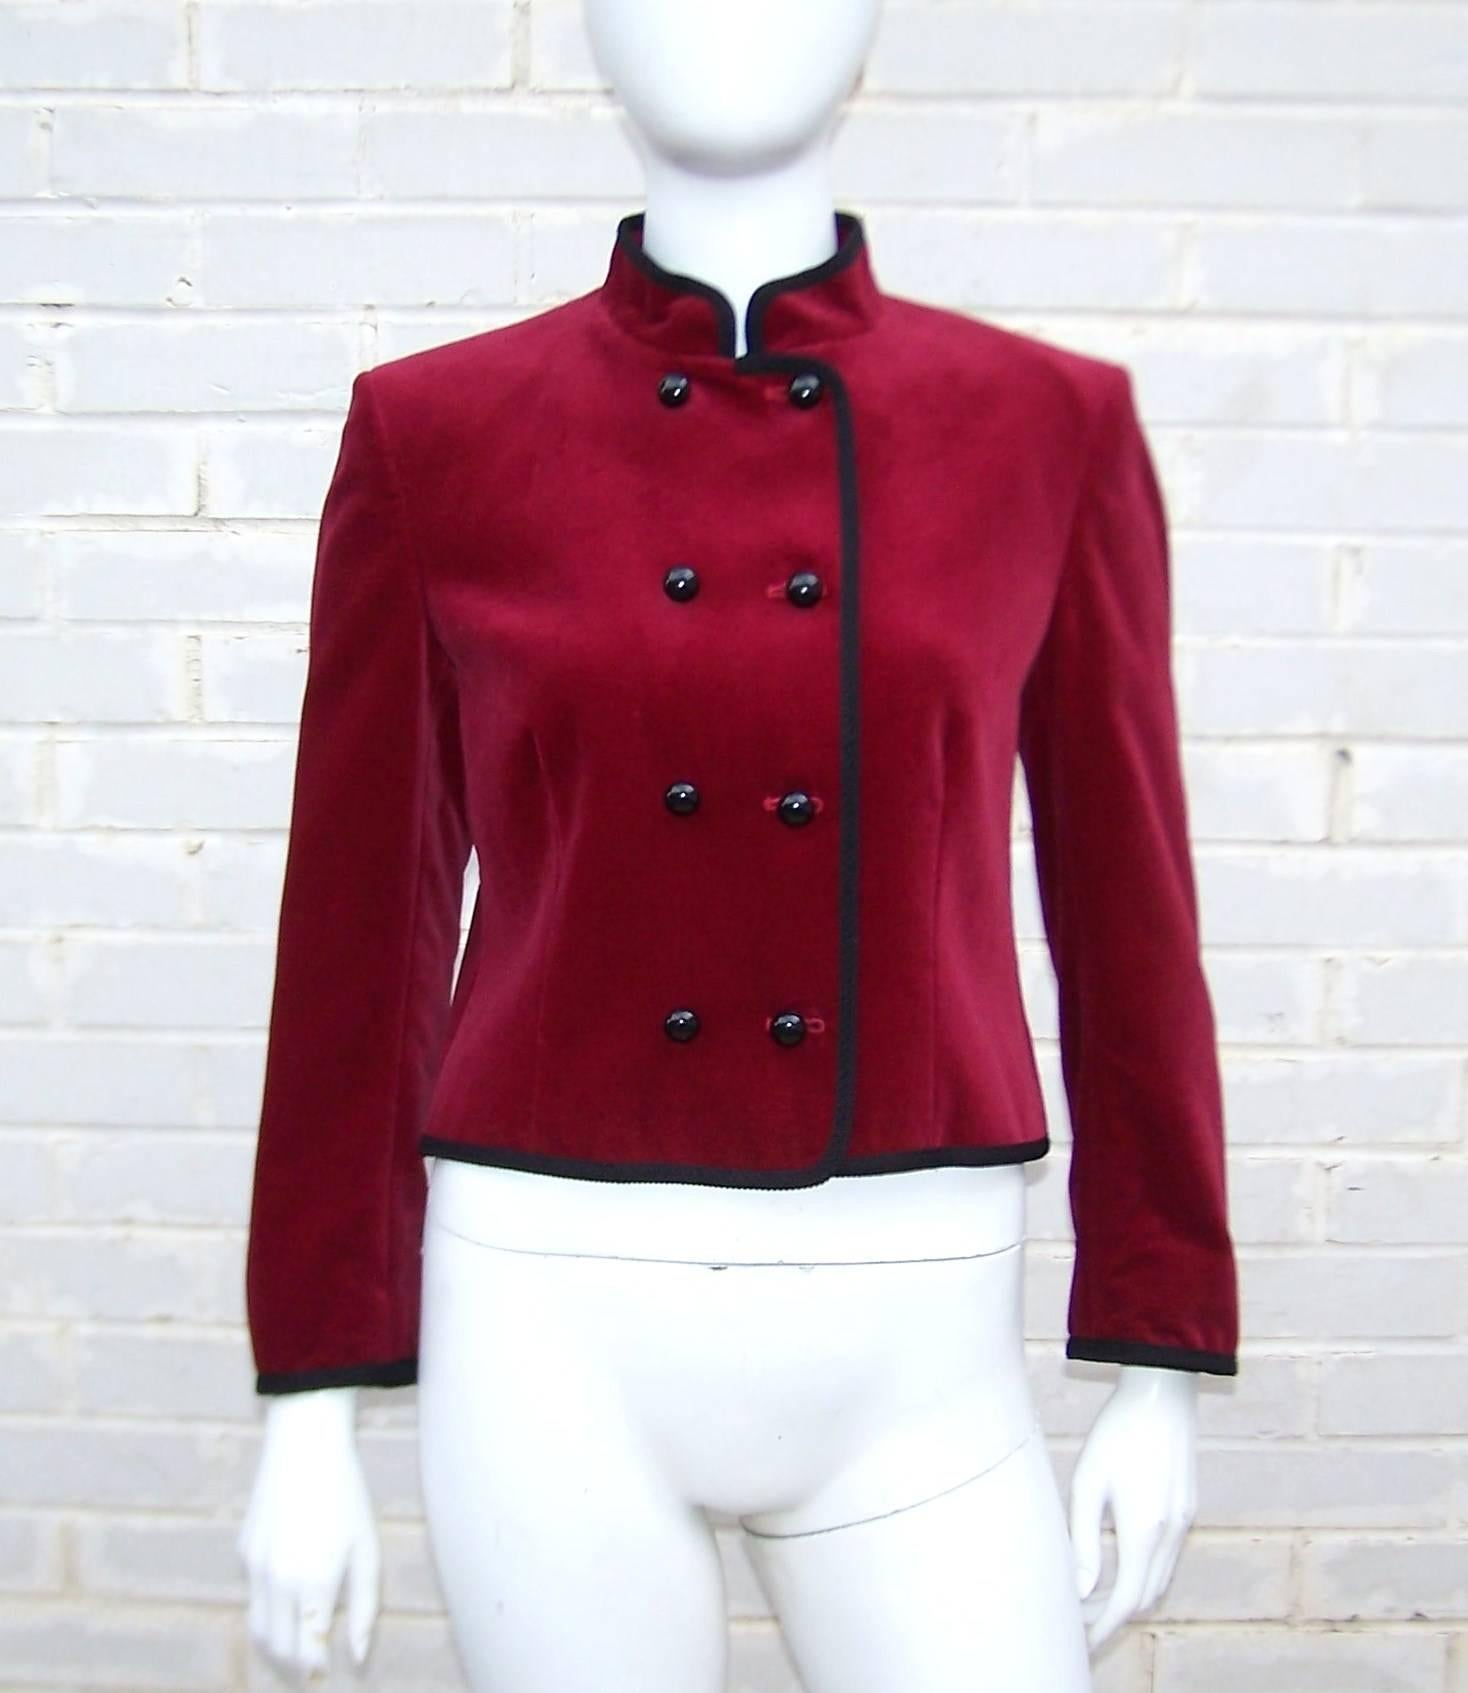 Jaeger has been making classic clothing since the turn of the 20th century.  This adorable velveteen jacket is reminiscent of an old school bellhop's topper.  The structured double breasted construction buttons at the front with shiny dome buttons